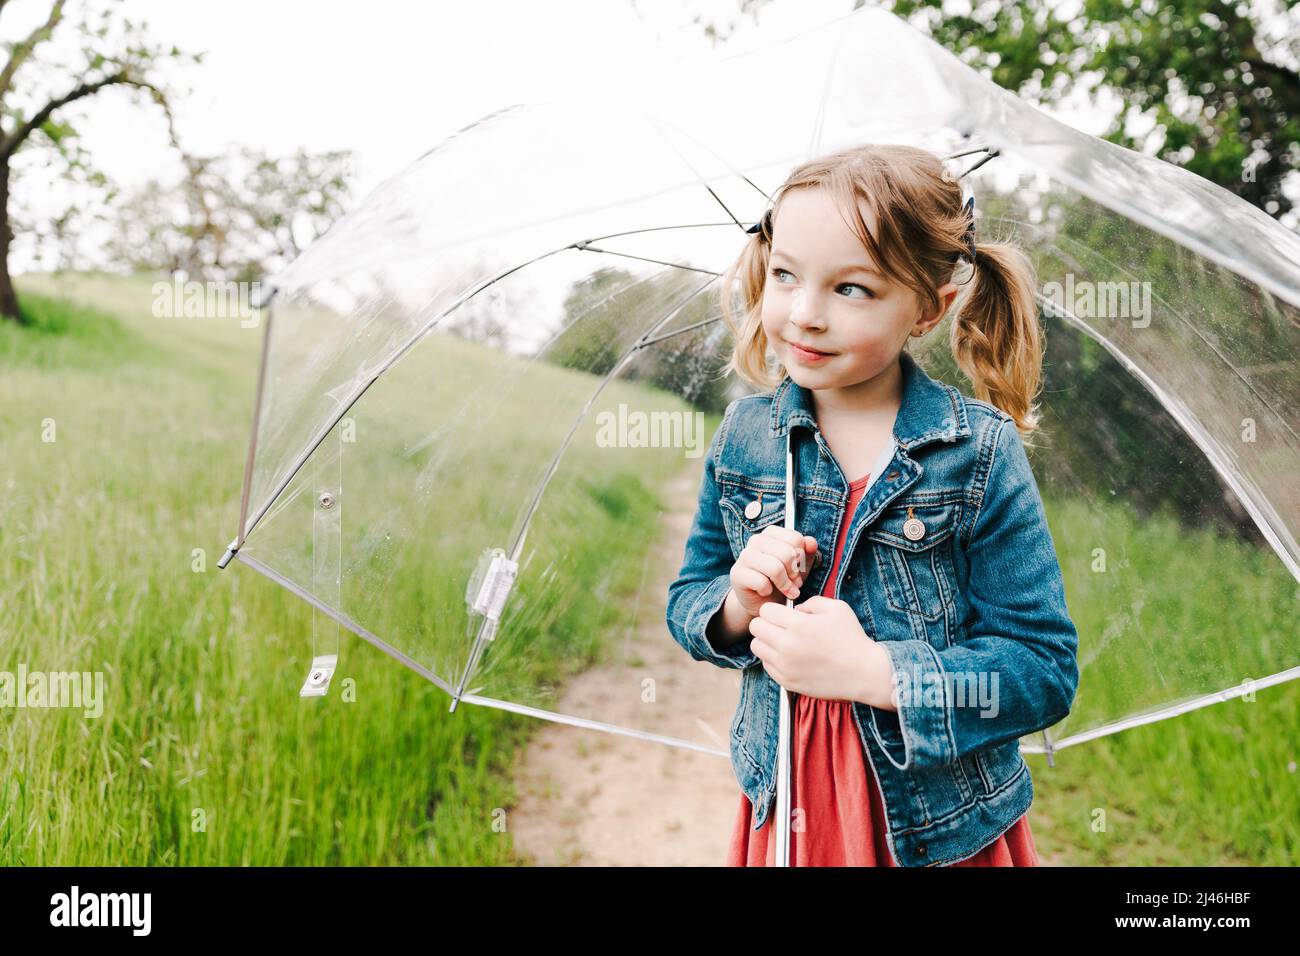 little girl with pigtails holding clear umbrella outdoors in spring Stock Photo